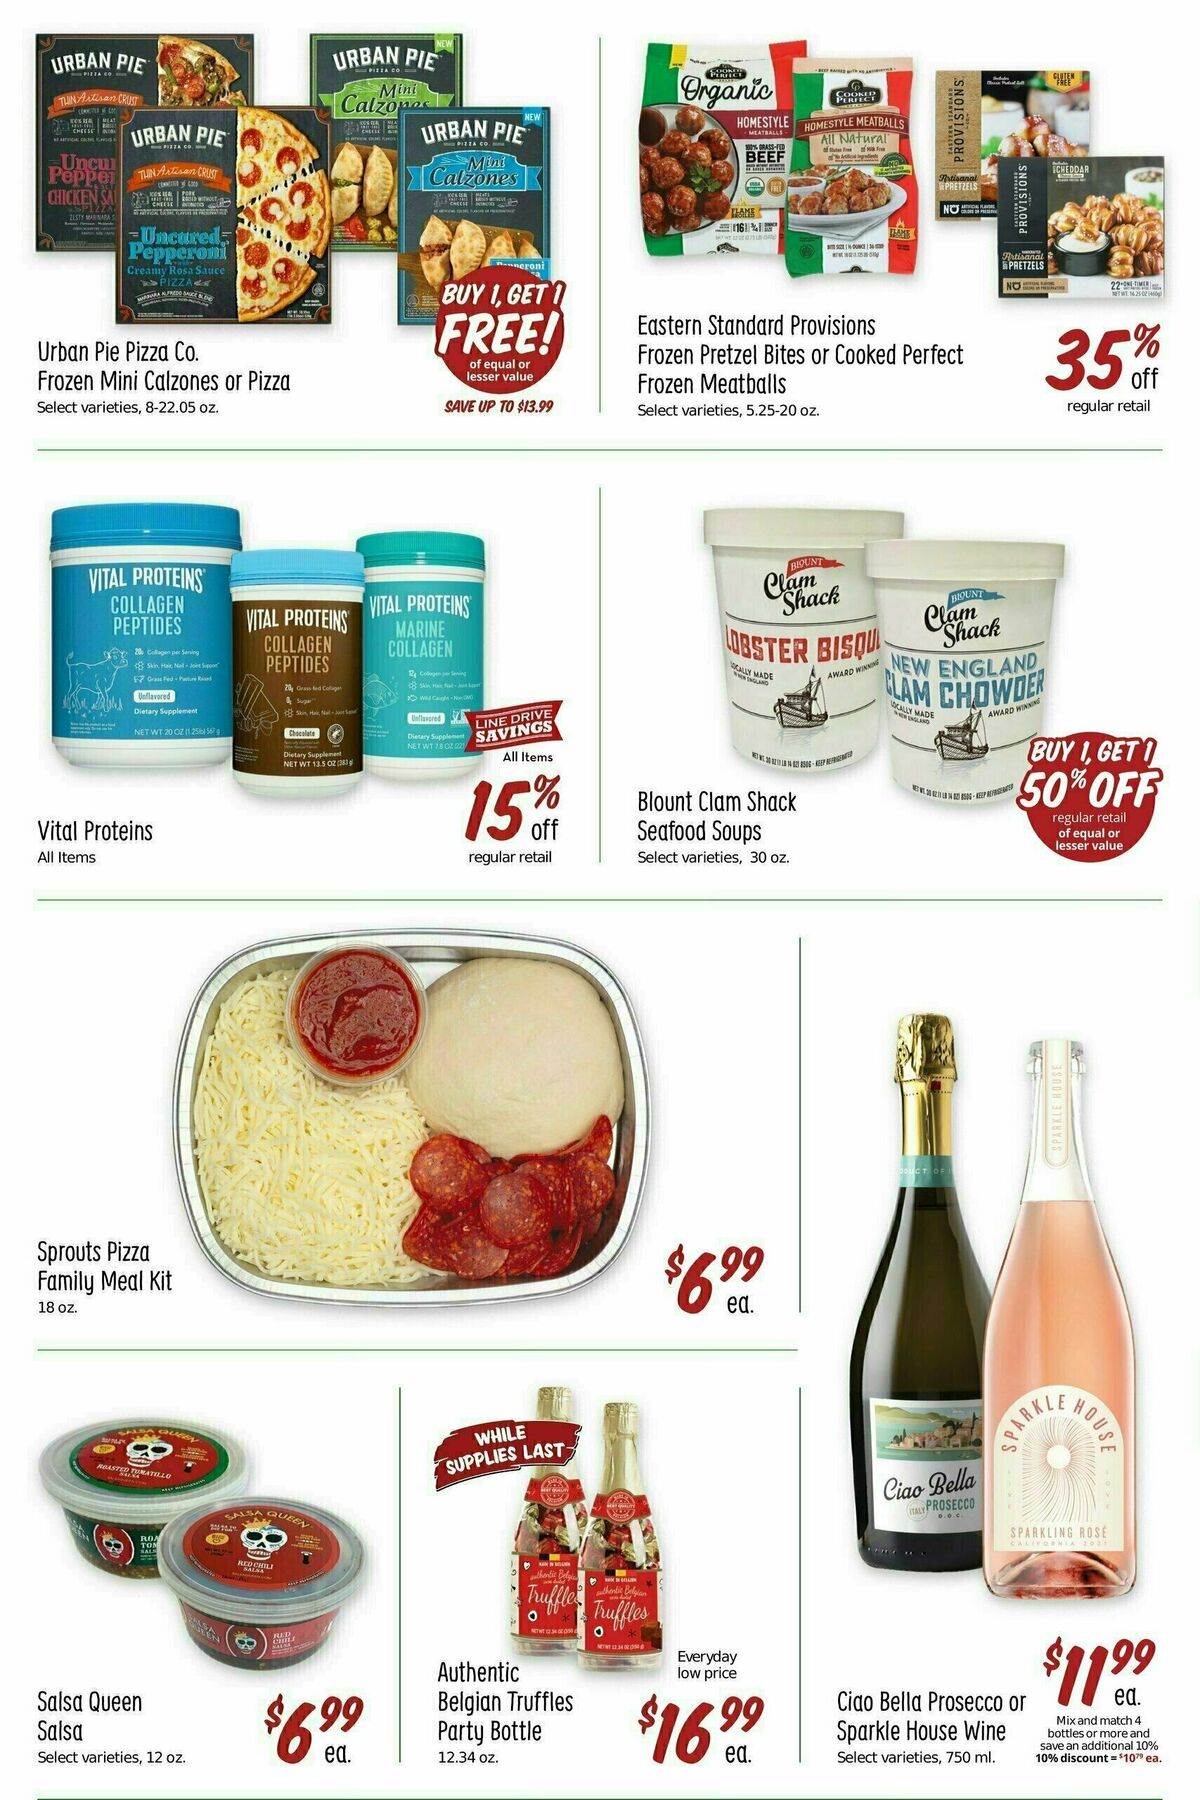 Sprouts Farmers Market Weekly Ad from December 27